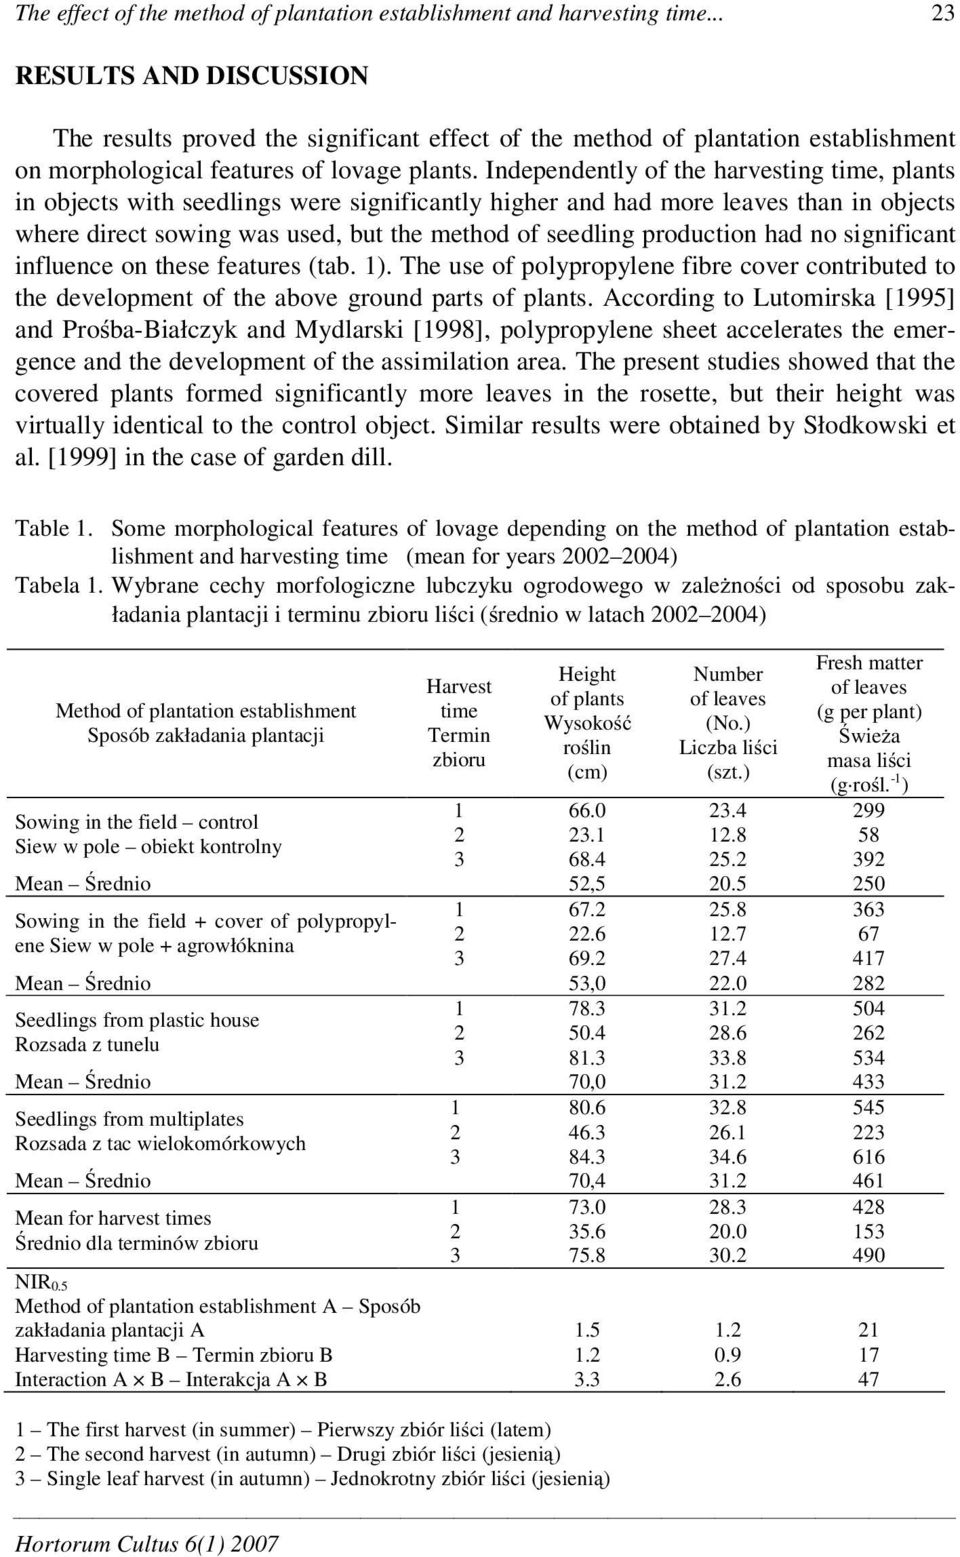 Independently of the harvesting time, plants in objects with seedlings were significantly higher and had more leaves than in objects where direct sowing was used, but the method of seedling